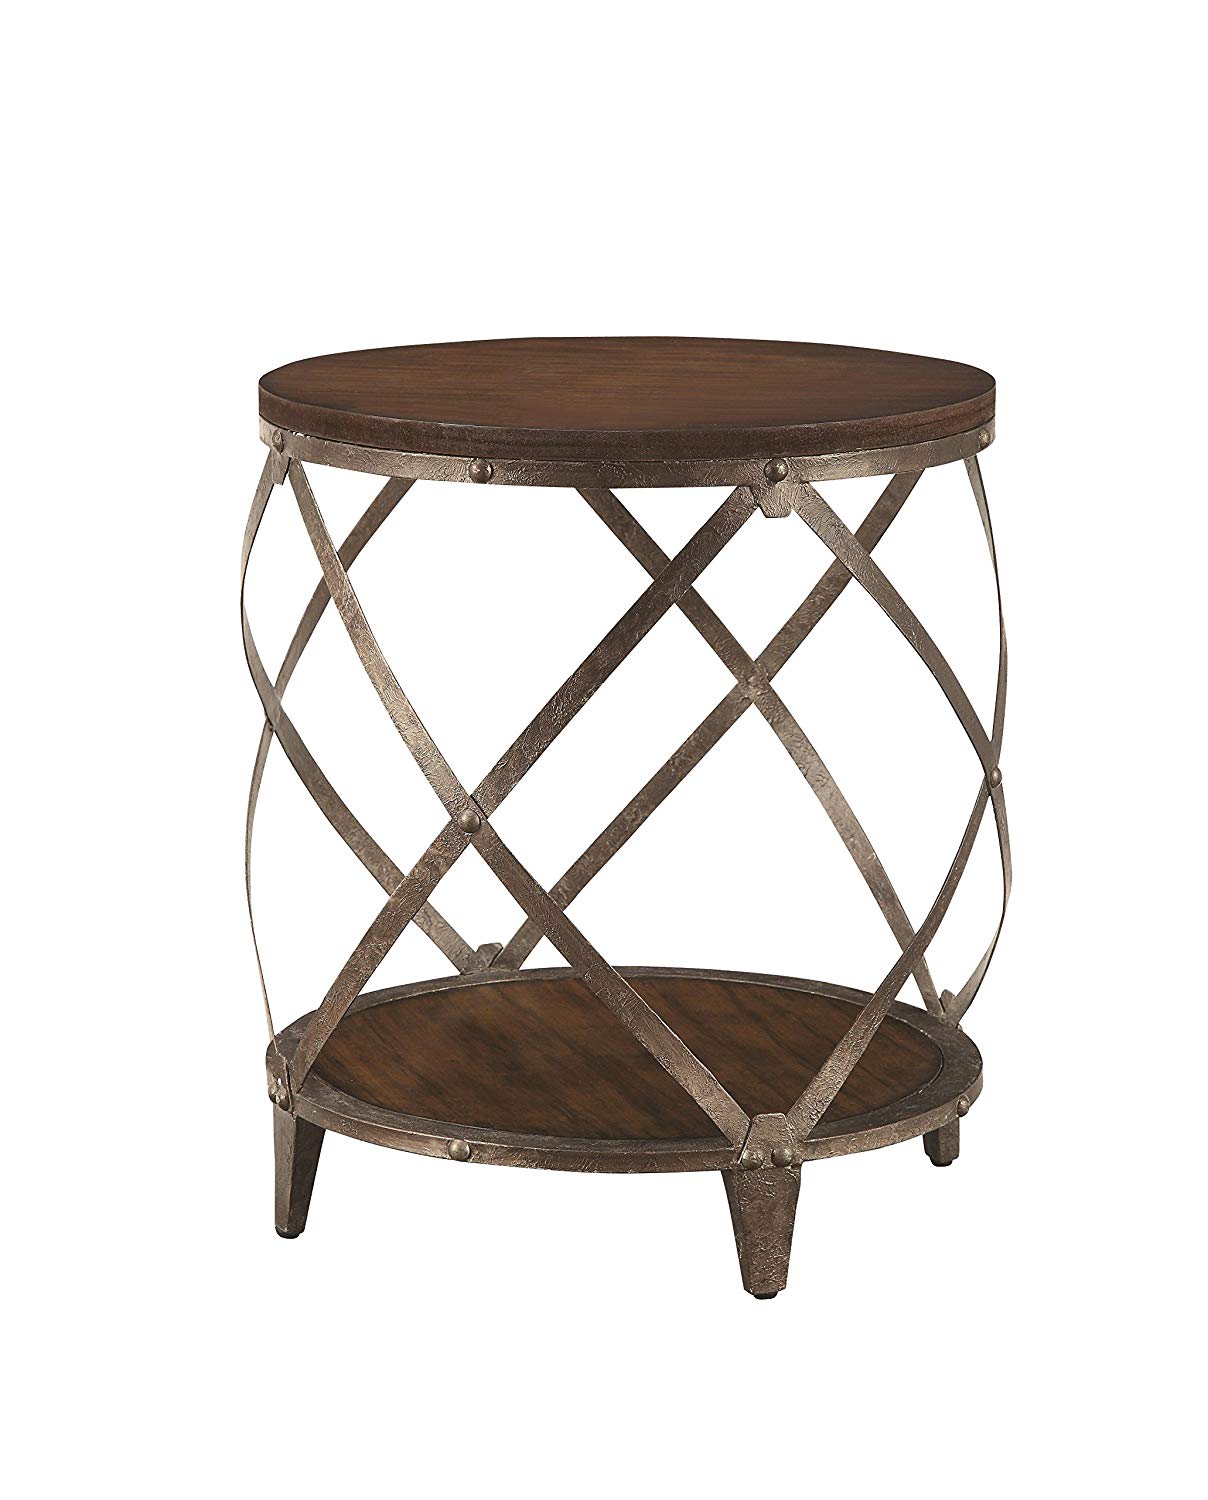 metal accent table with drum shape brown kitchen dining copper pier clearance pillows grey wash wood coffee drawer mirrored bedside piece and chairs half moon console cabinet dale